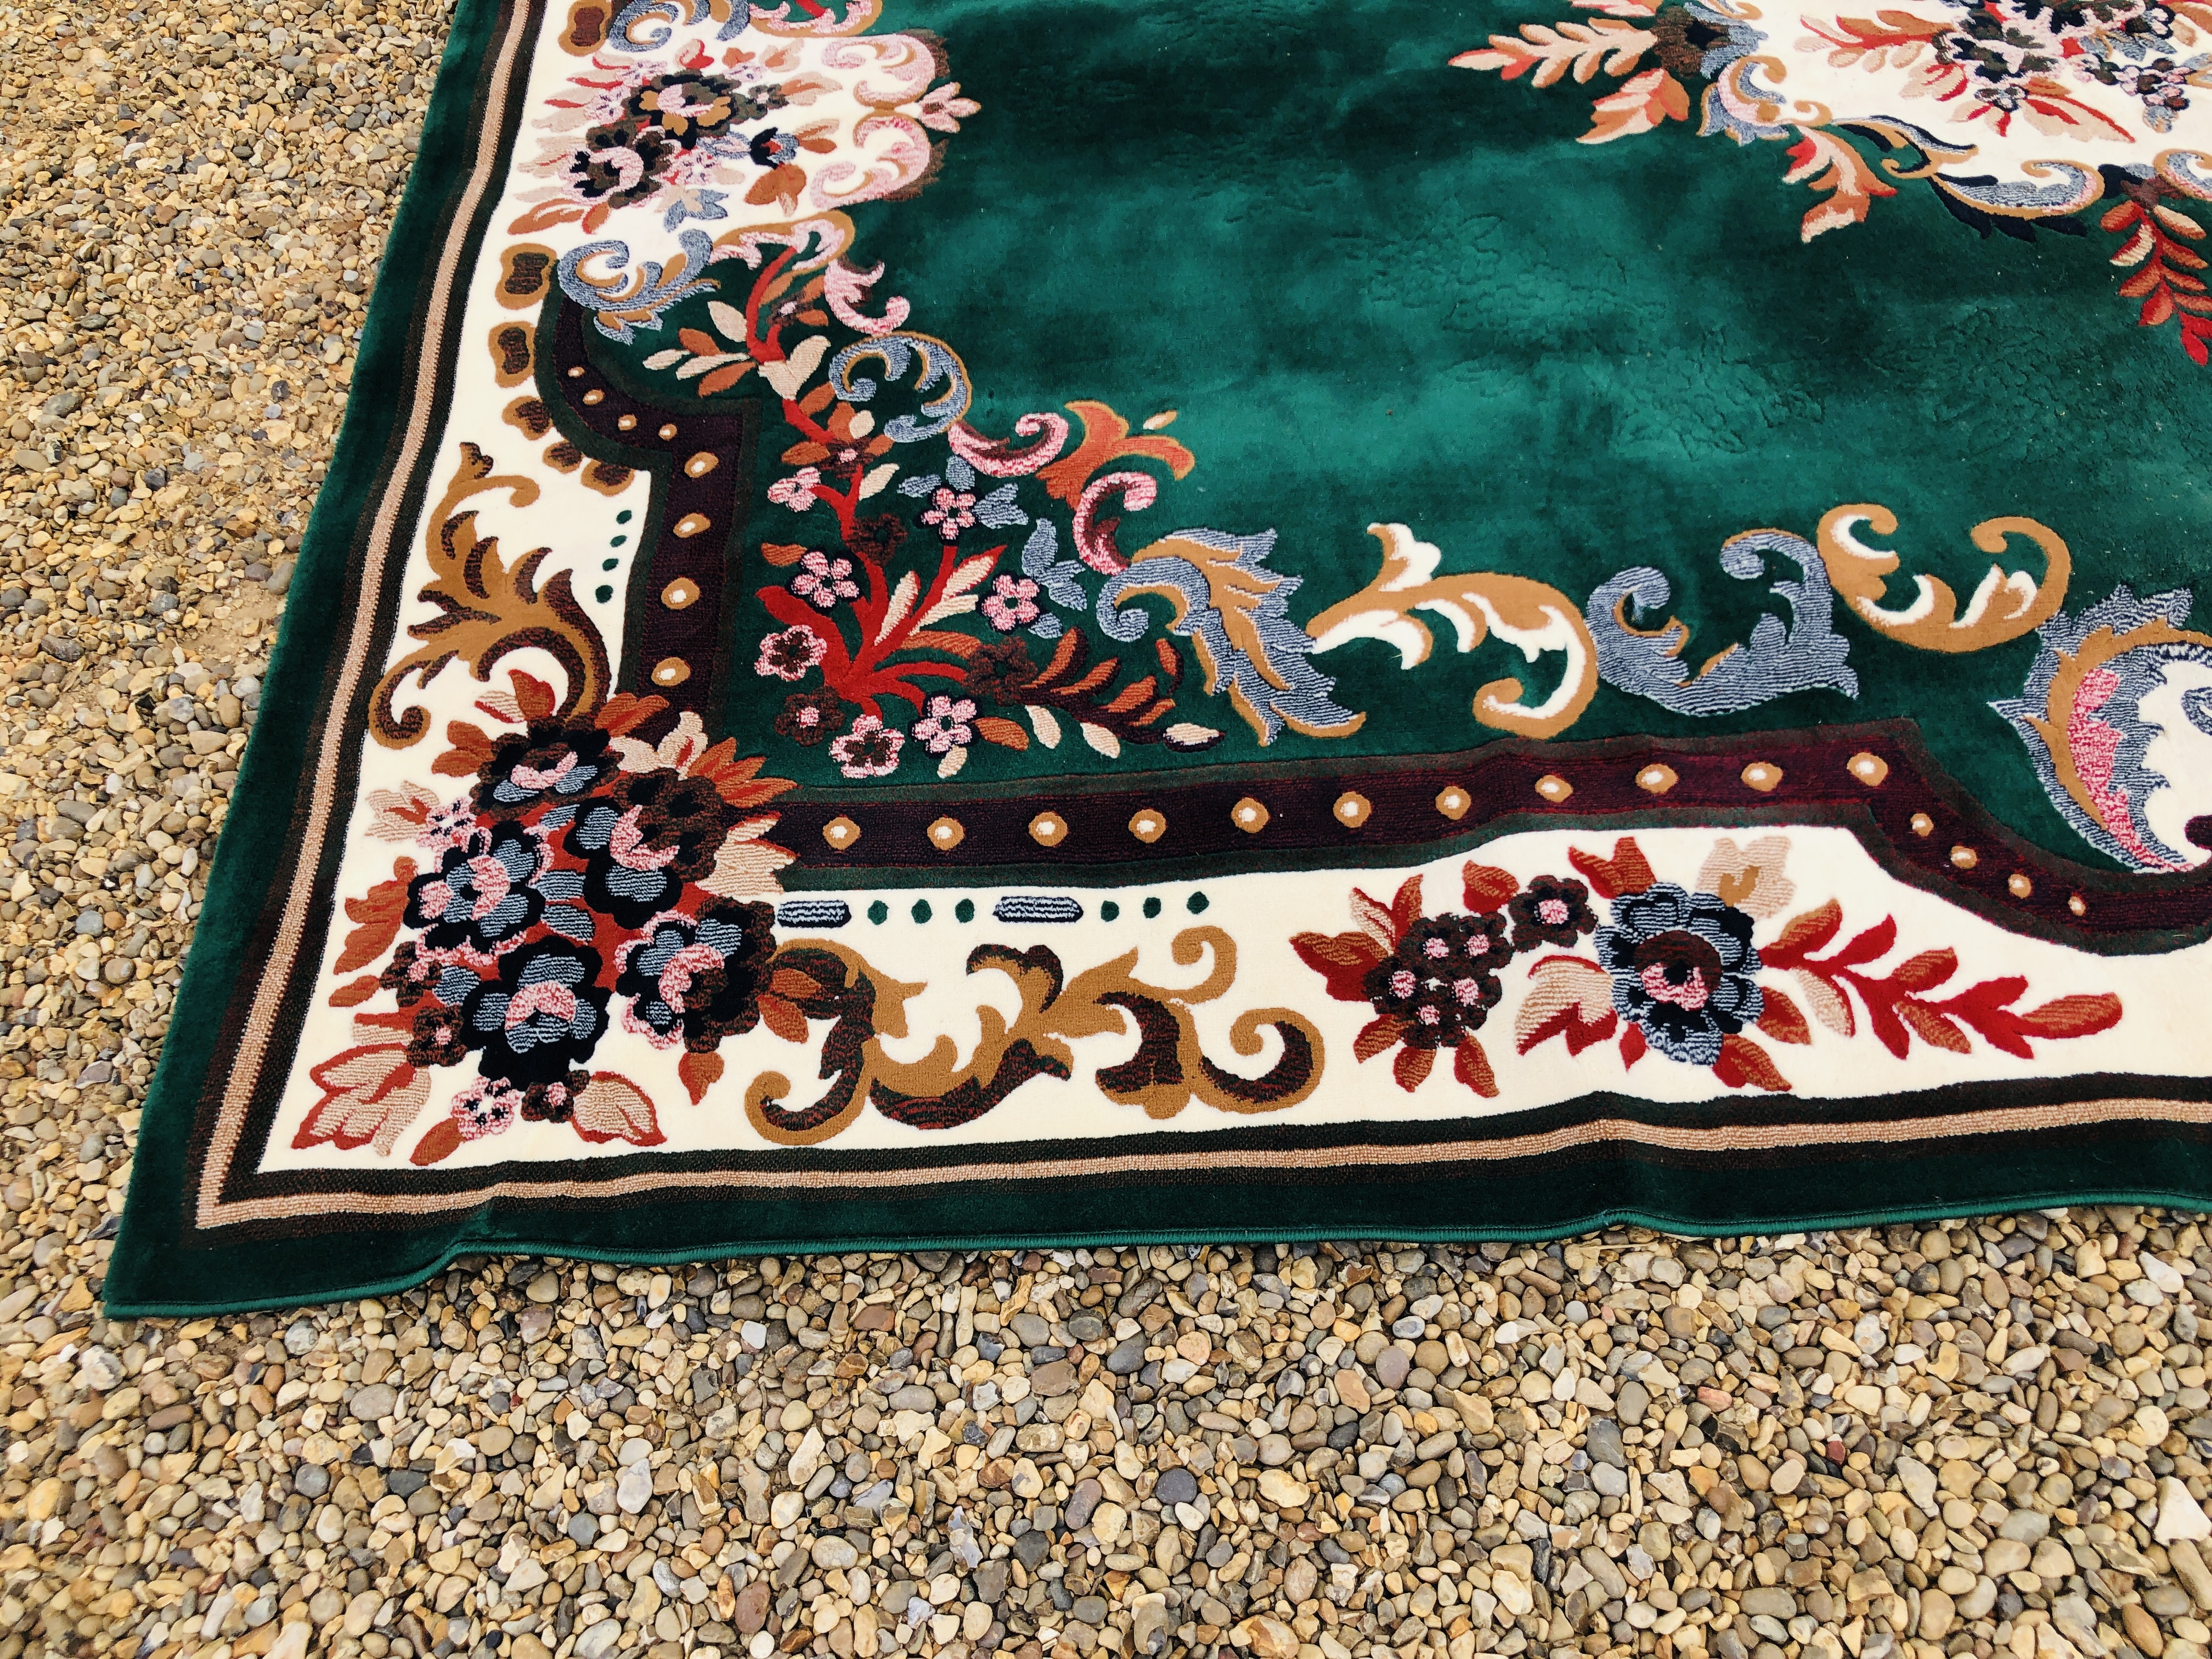 A MODERN CHINESE GARDEN CARPET SQUARE IN EMERALD GREEN 380/280. - Image 6 of 7